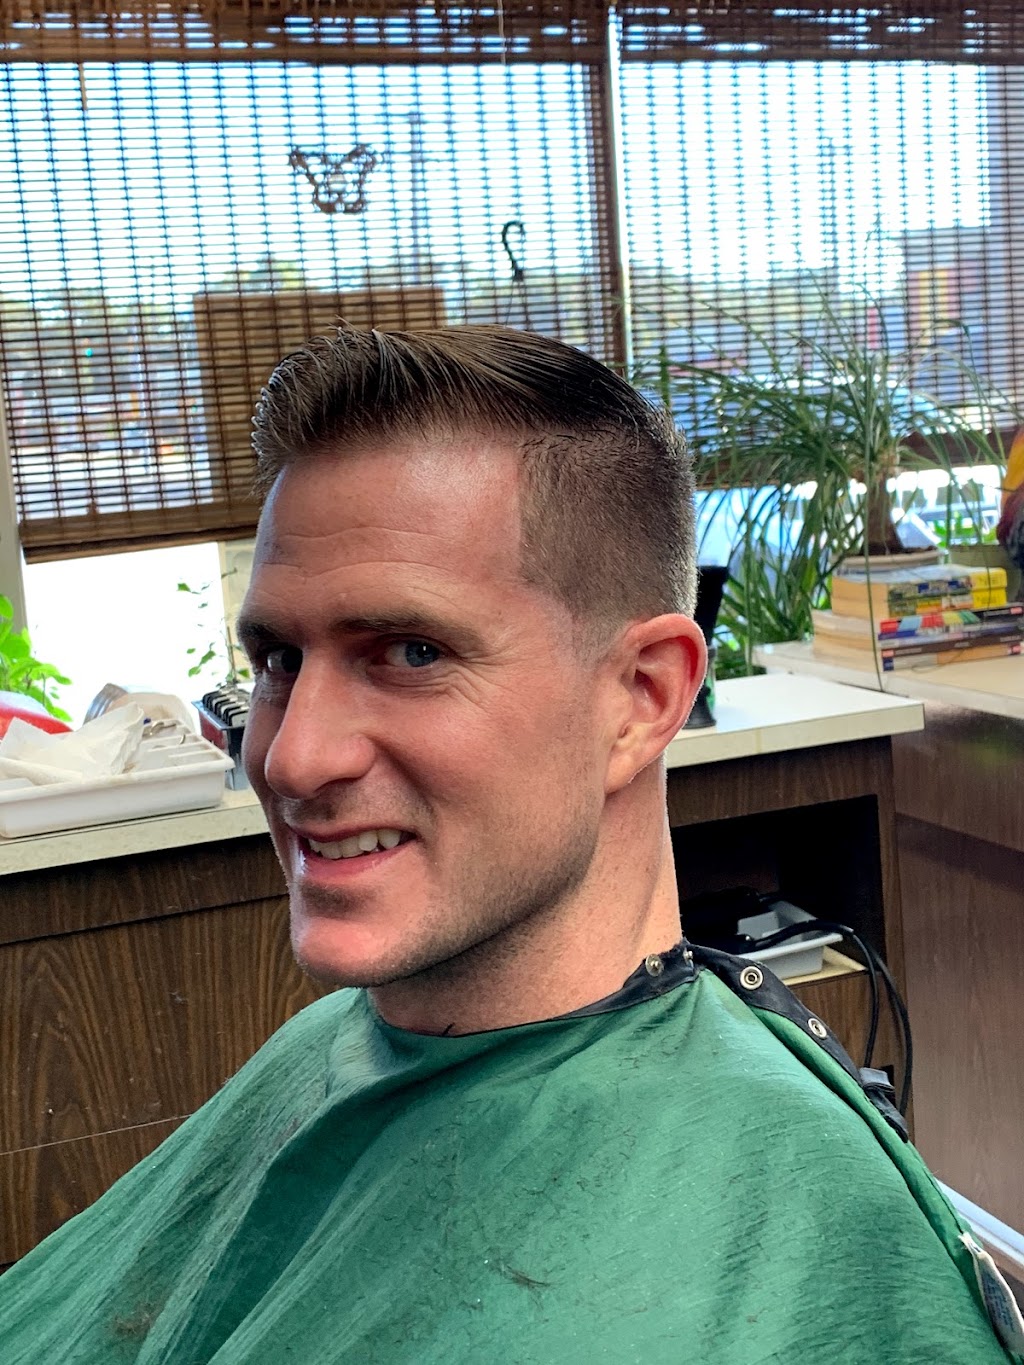 Michael’ s professional Haircutting | 1937 W MacDade Blvd f11, Woodlyn, PA 19094 | Phone: (610) 872-9840